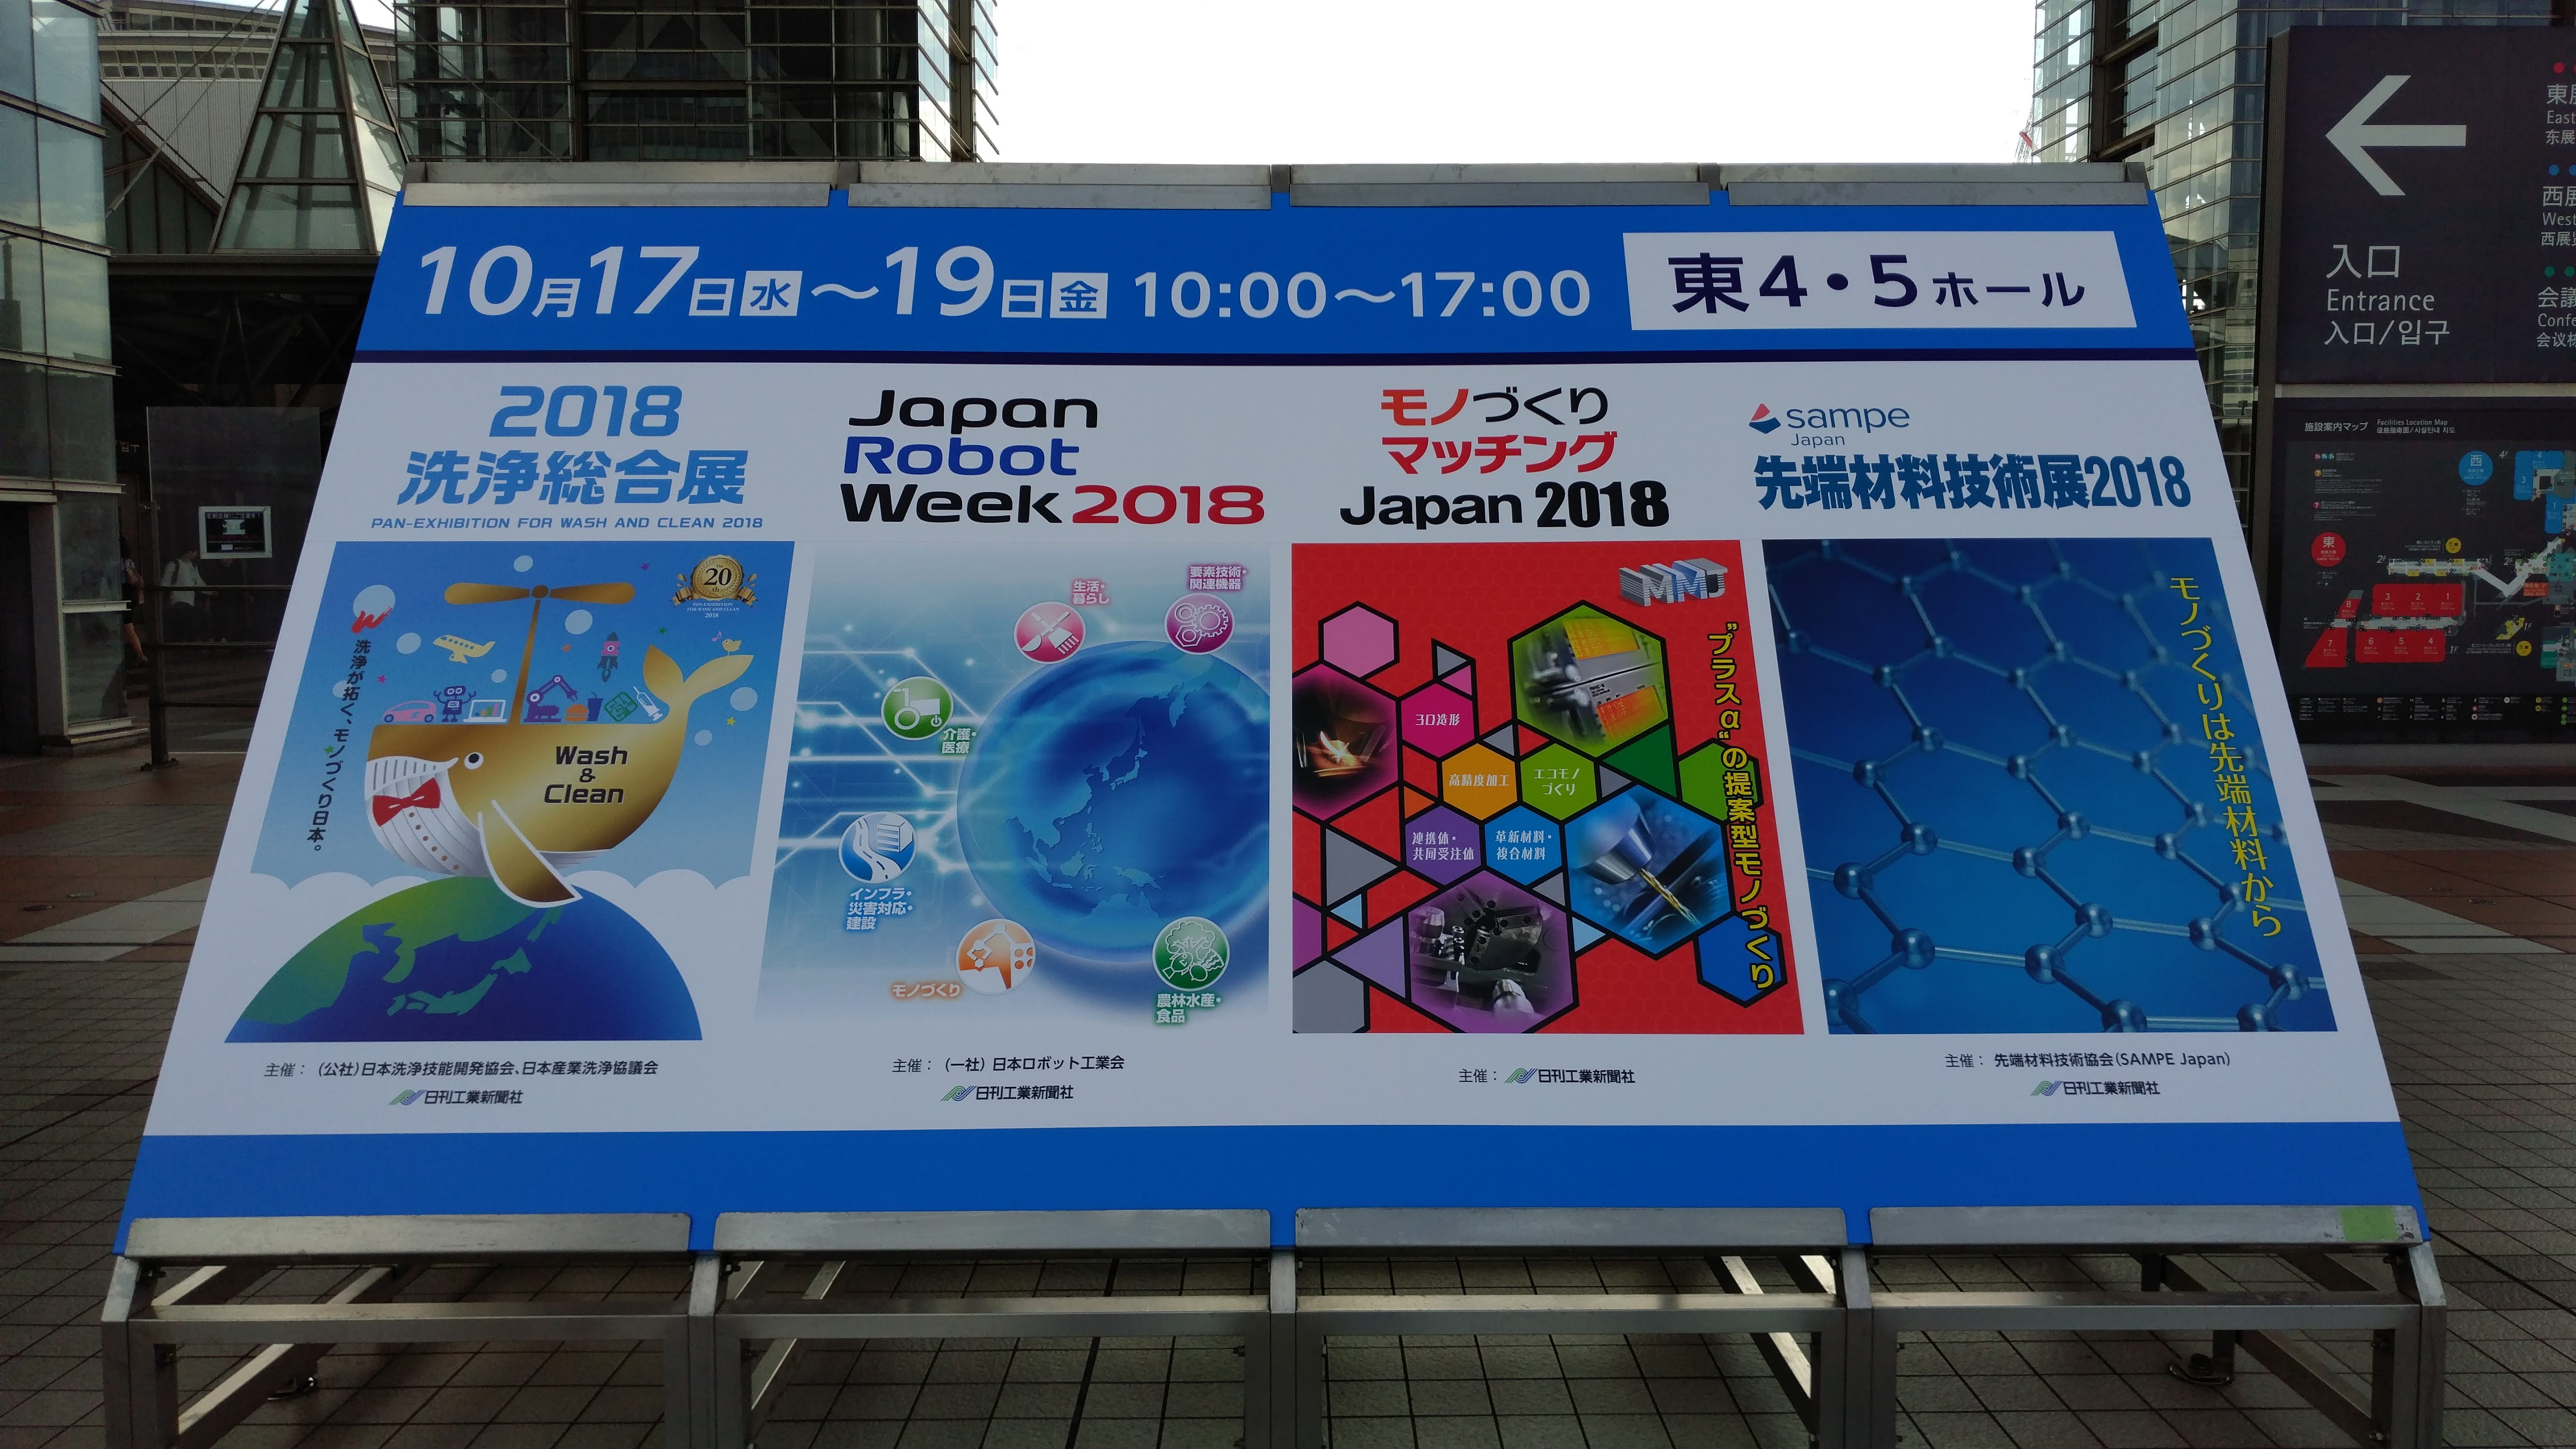 a sign for multiple events in japanese, with Japan Robot Week 2018 in English